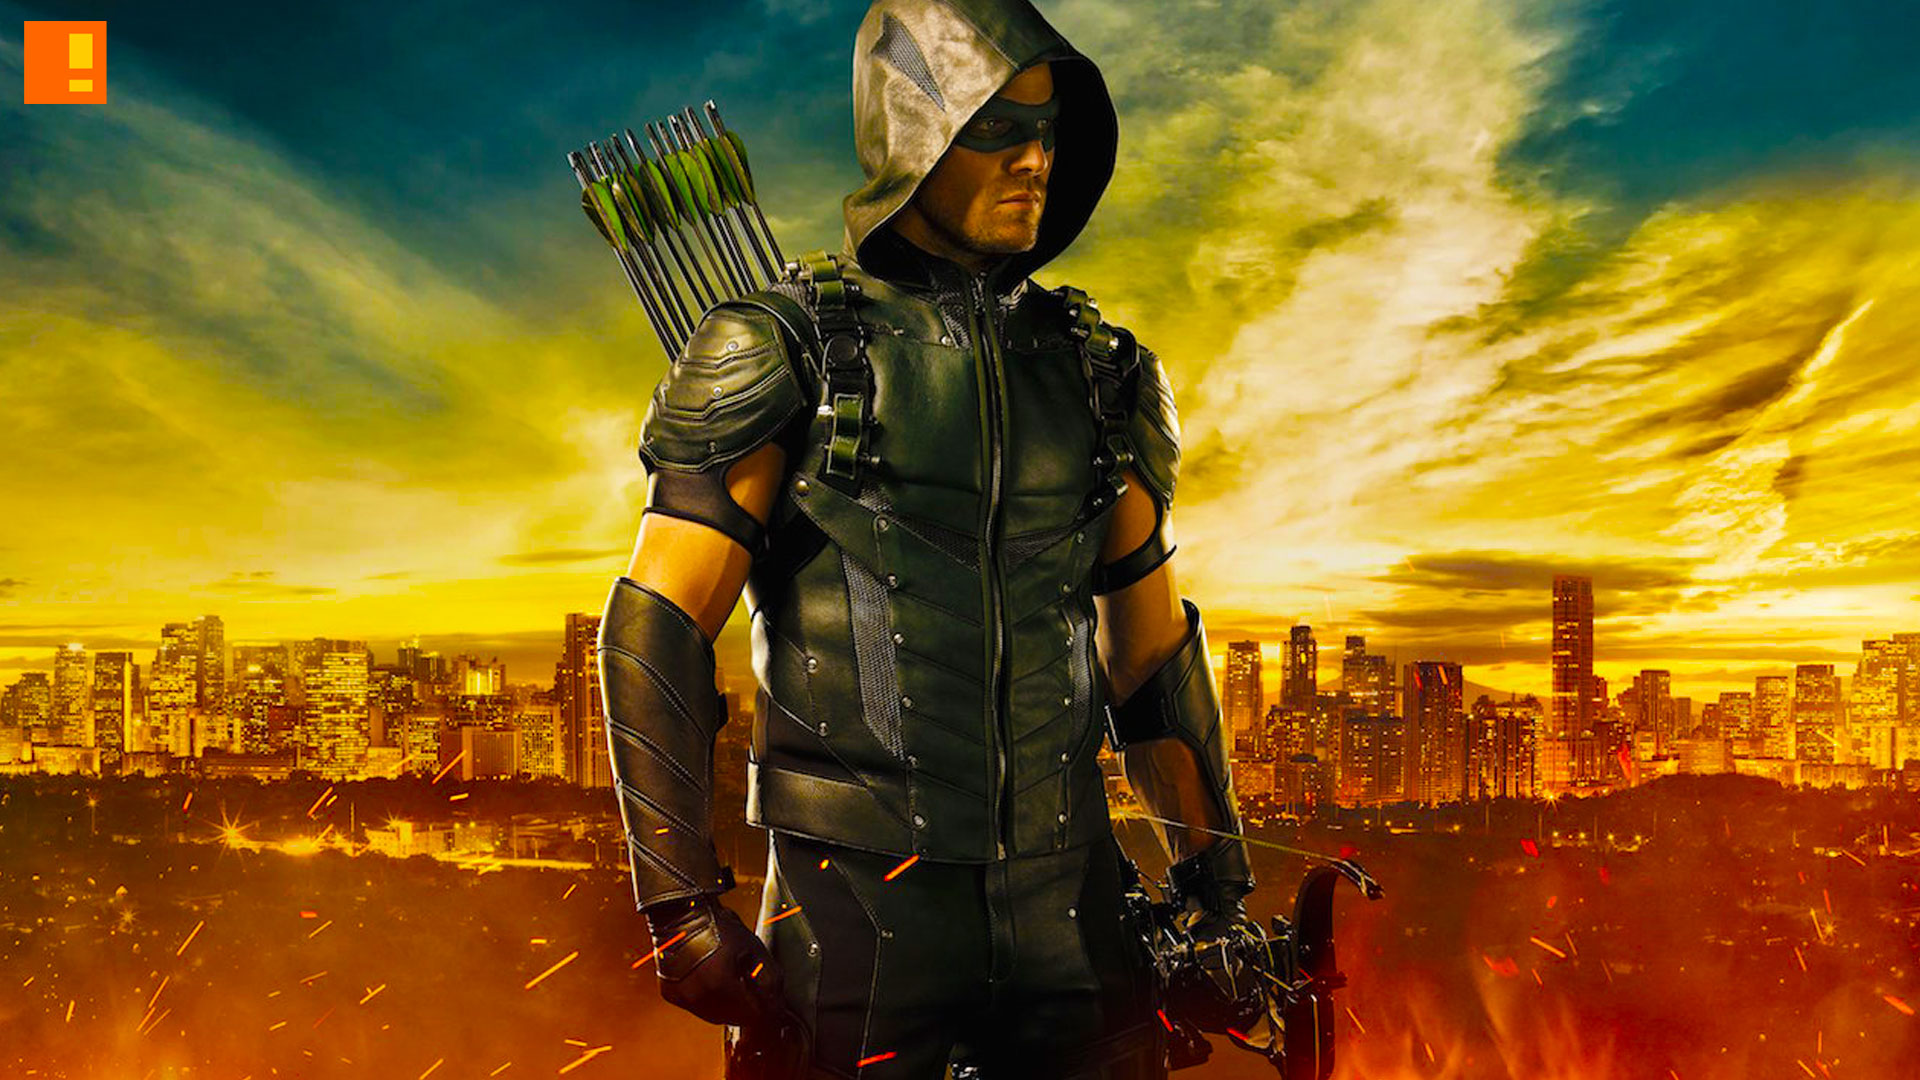 arrow, season 4, costume, the cw, the cw network, finale, schism, diggle, green arrow, stephen amell, dc comics, the action pixel, @theactionpixel